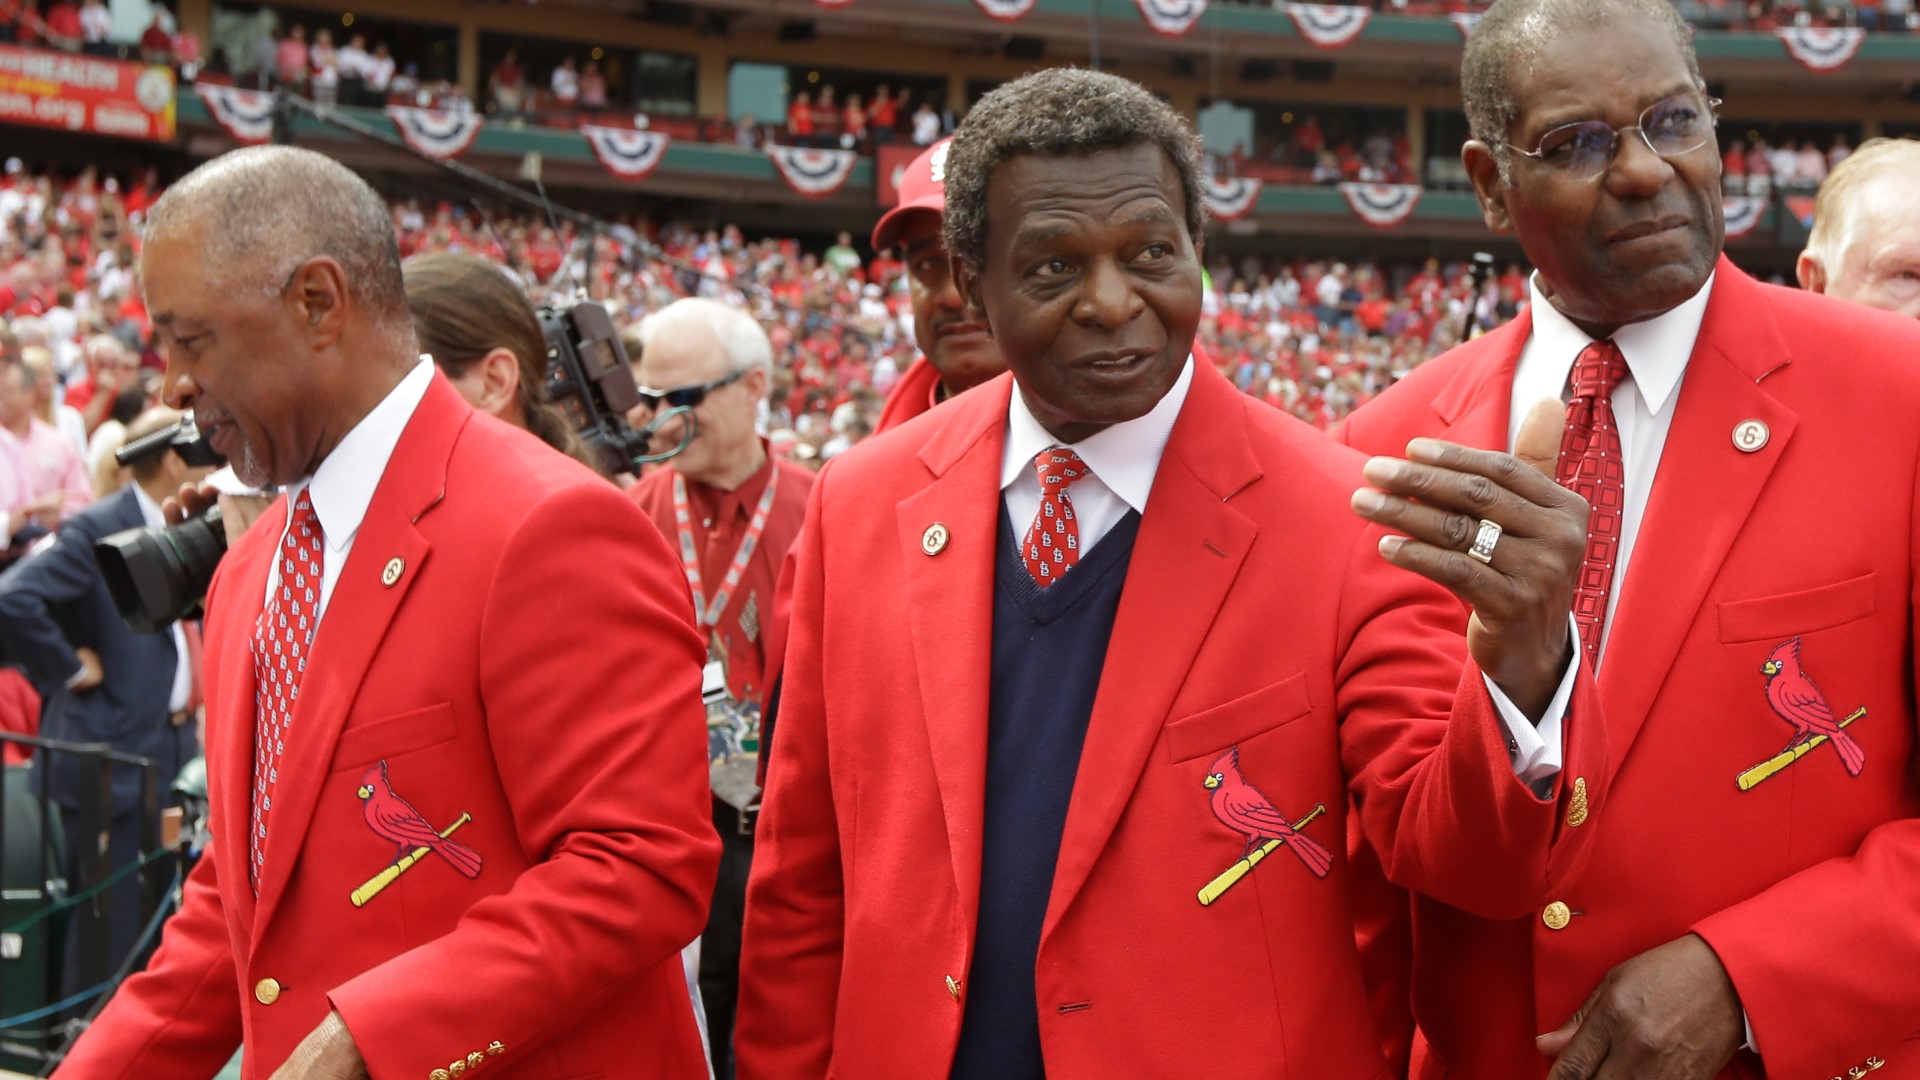 St. Louis Cardinals opening day through the years